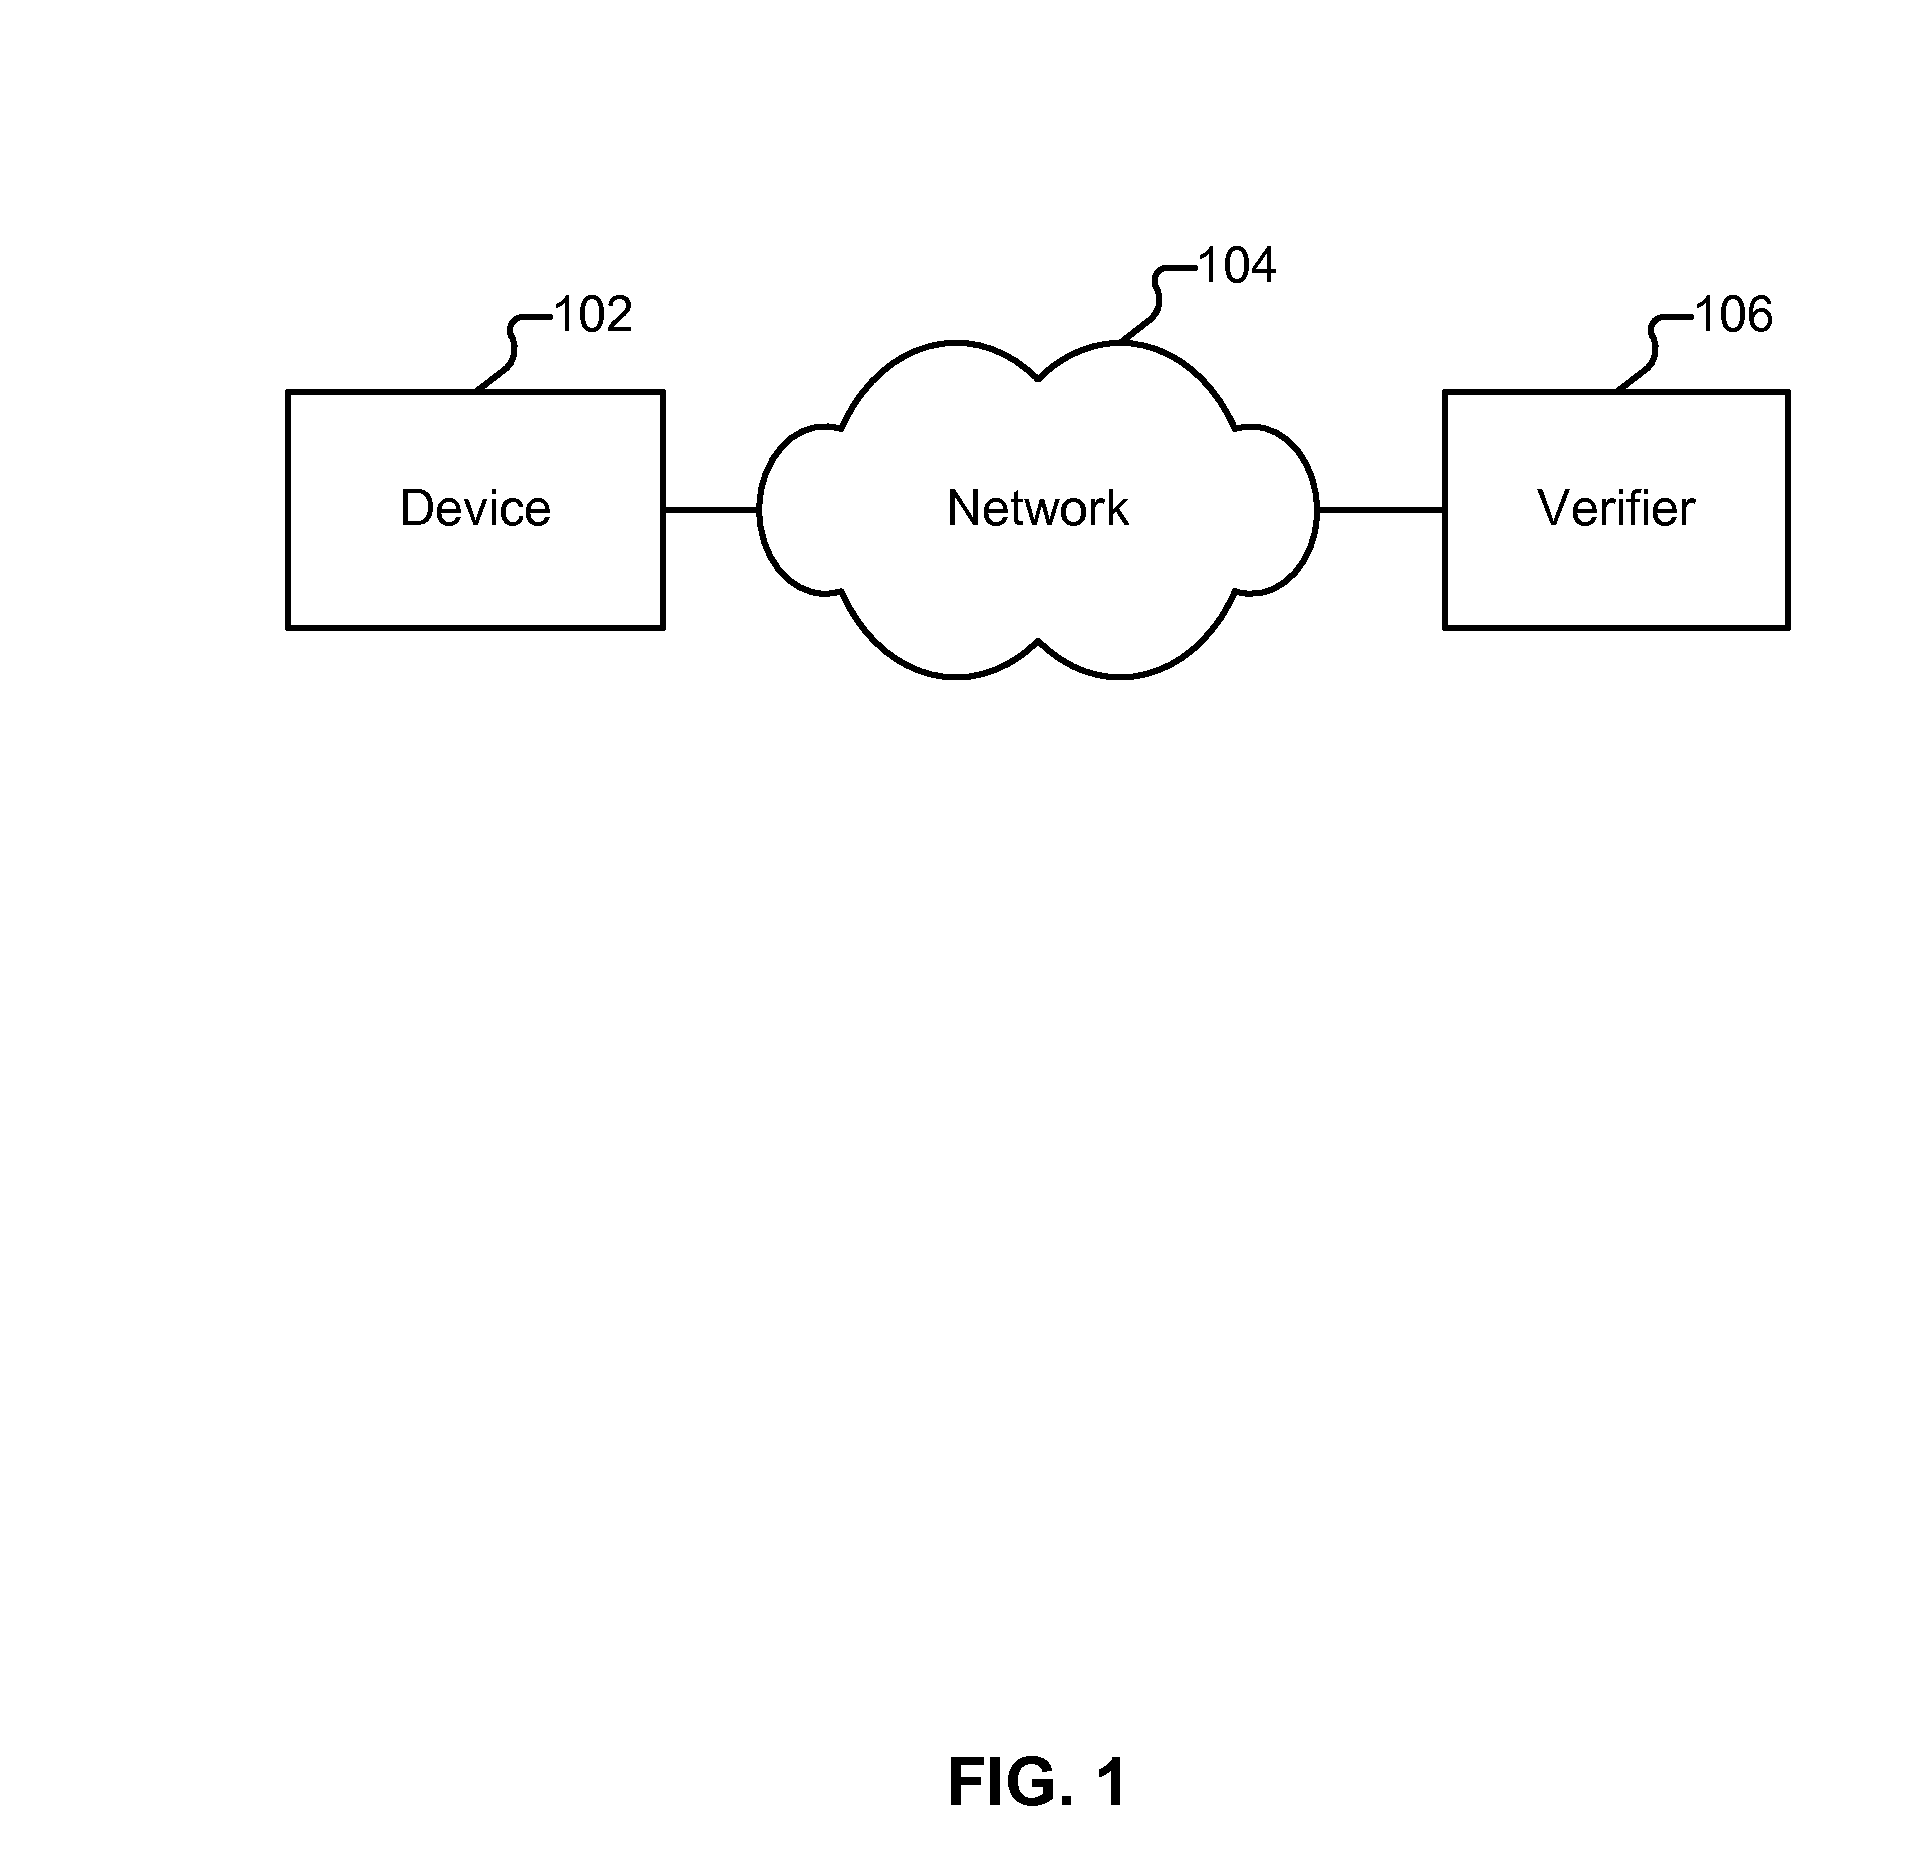 Auditing a device